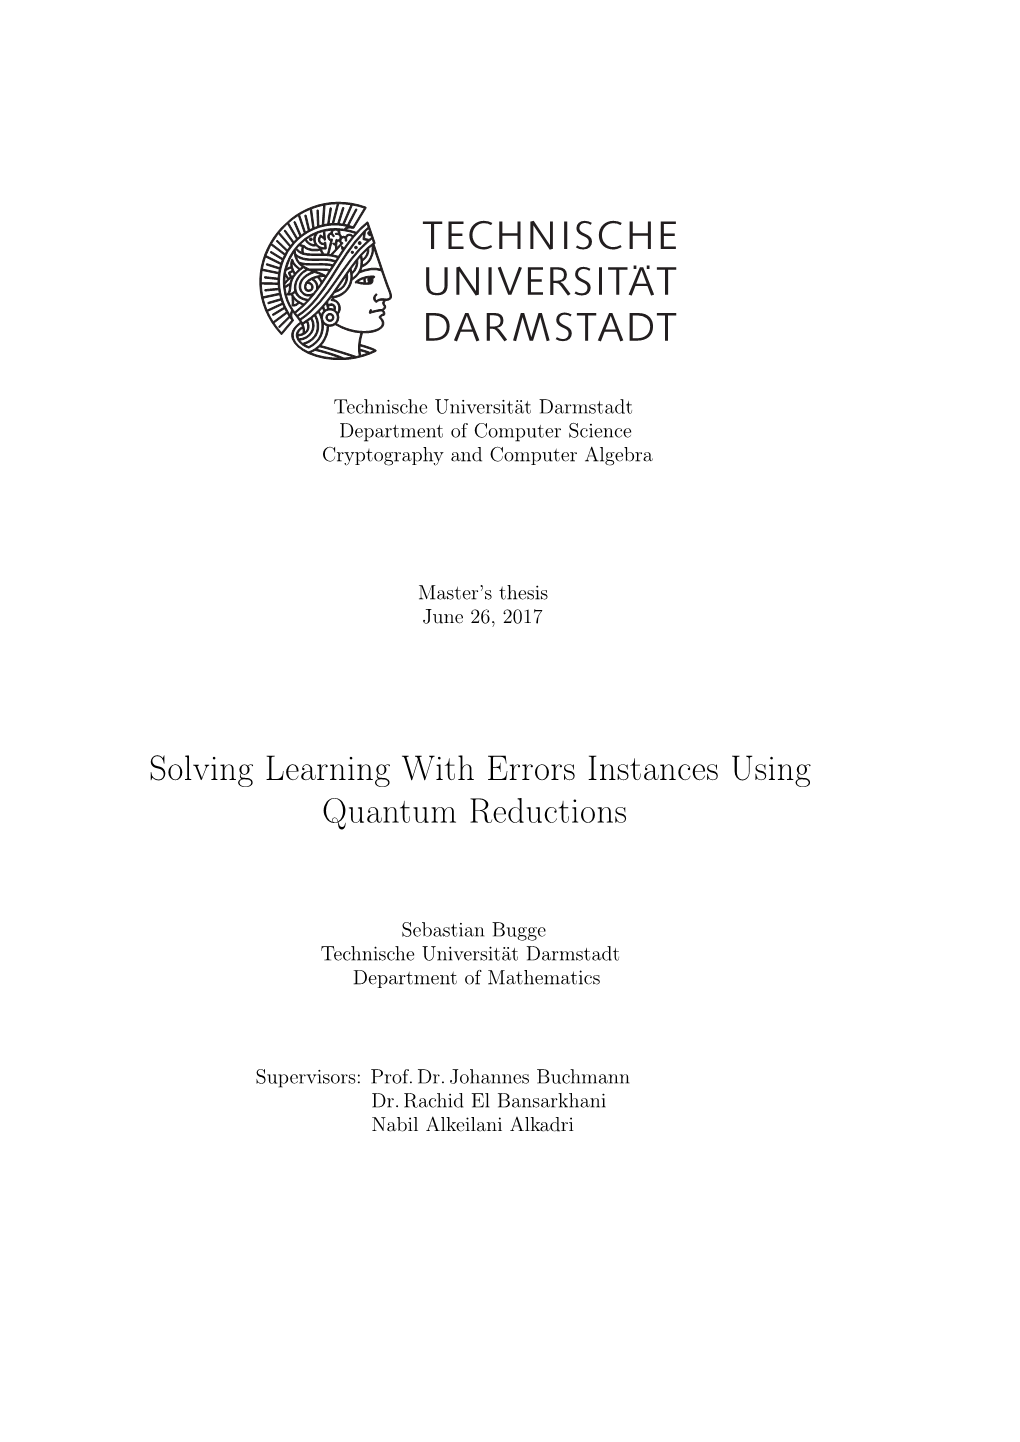 Solving Learning with Errors Instances Using Quantum Reductions